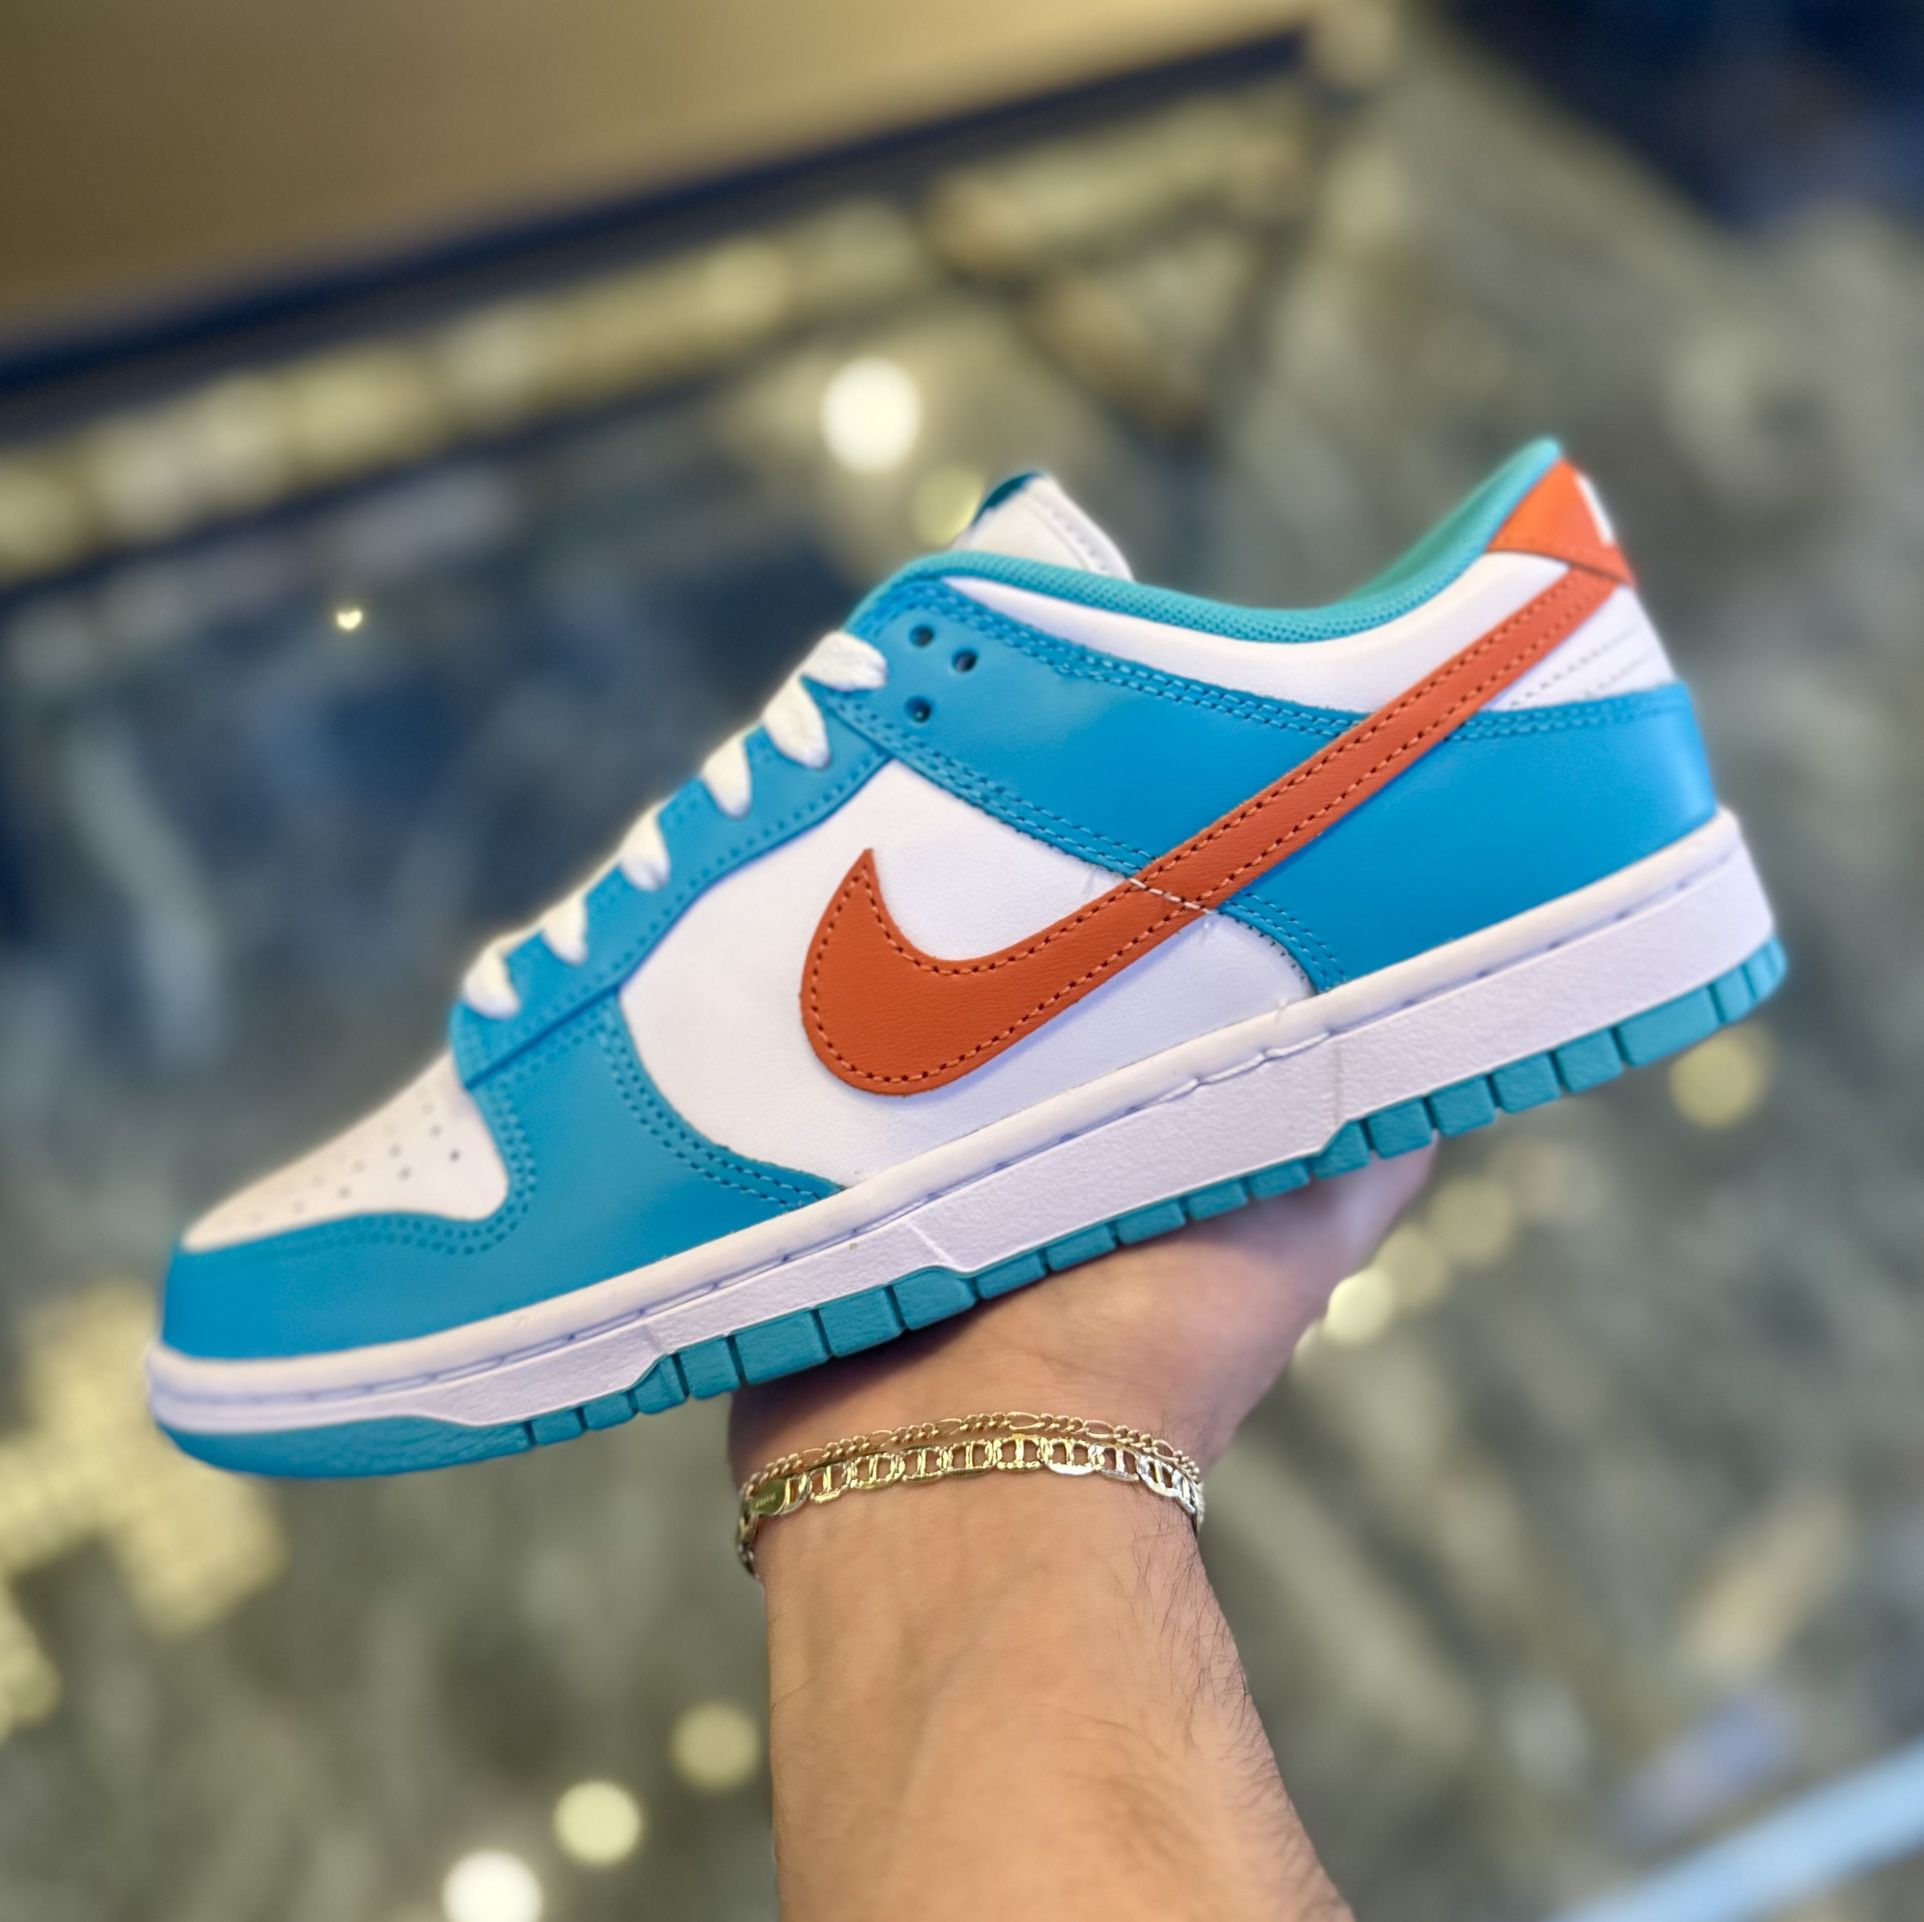 Nike Dunk Low “Miami Dolphins” 7.5m / 8m / 8.5m / 9m / 9.5m / 10m / 10.5m / 11m / 11.5m / 12m / 13m IN HAND BRAND NEW